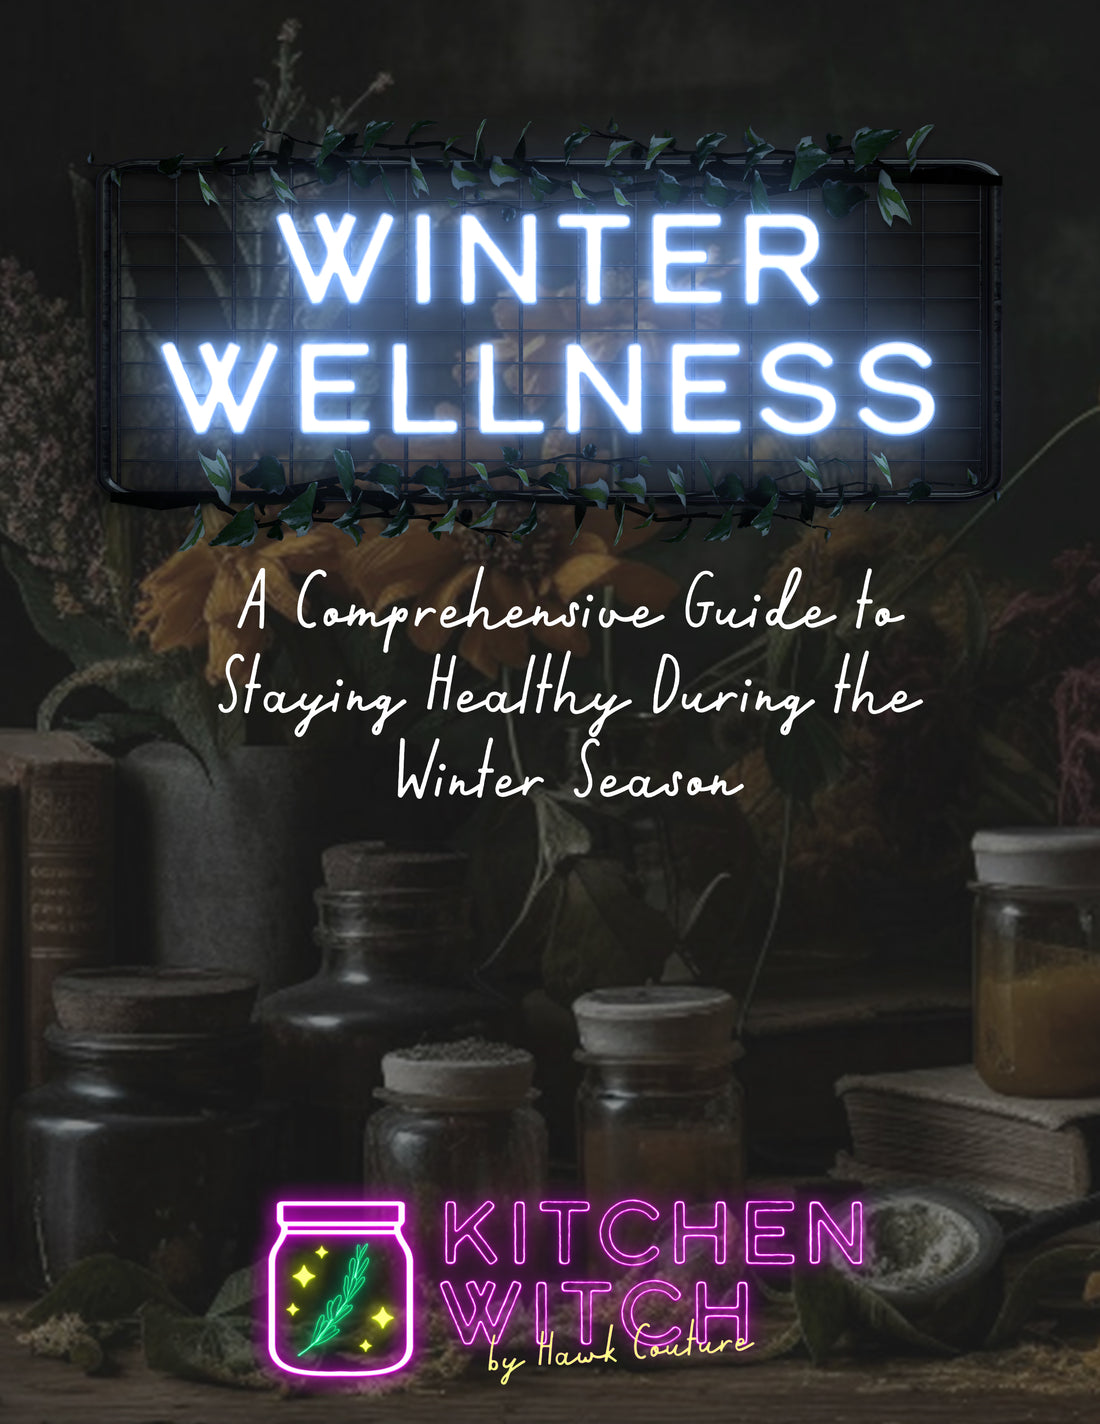 The Winter Wellness Guide Hath Dropped!!